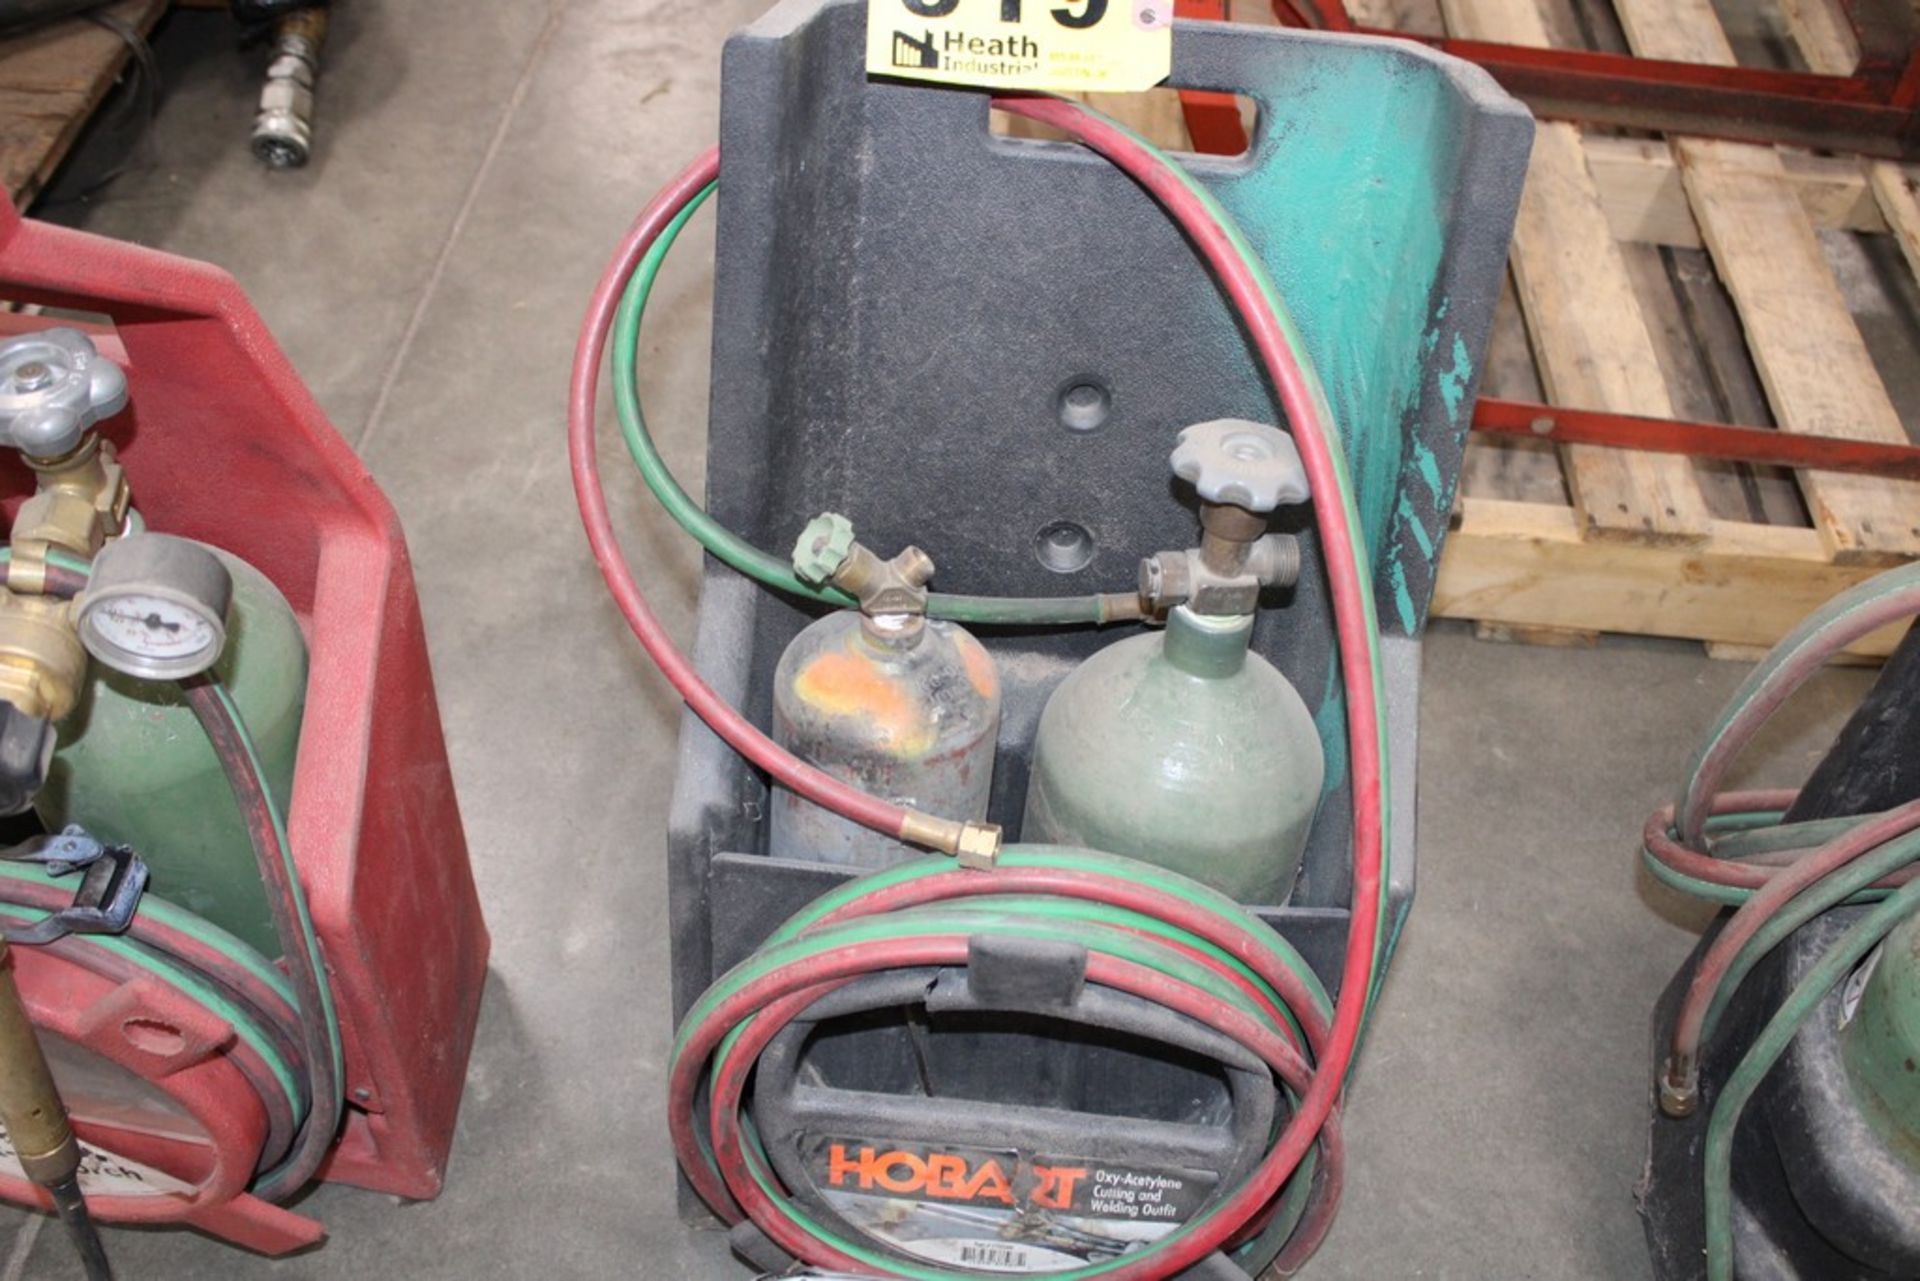 HOBART CUTTING/WELDING OUTFIT WITH TANKS, GAGES, HOSE AND TORCH - Image 2 of 3